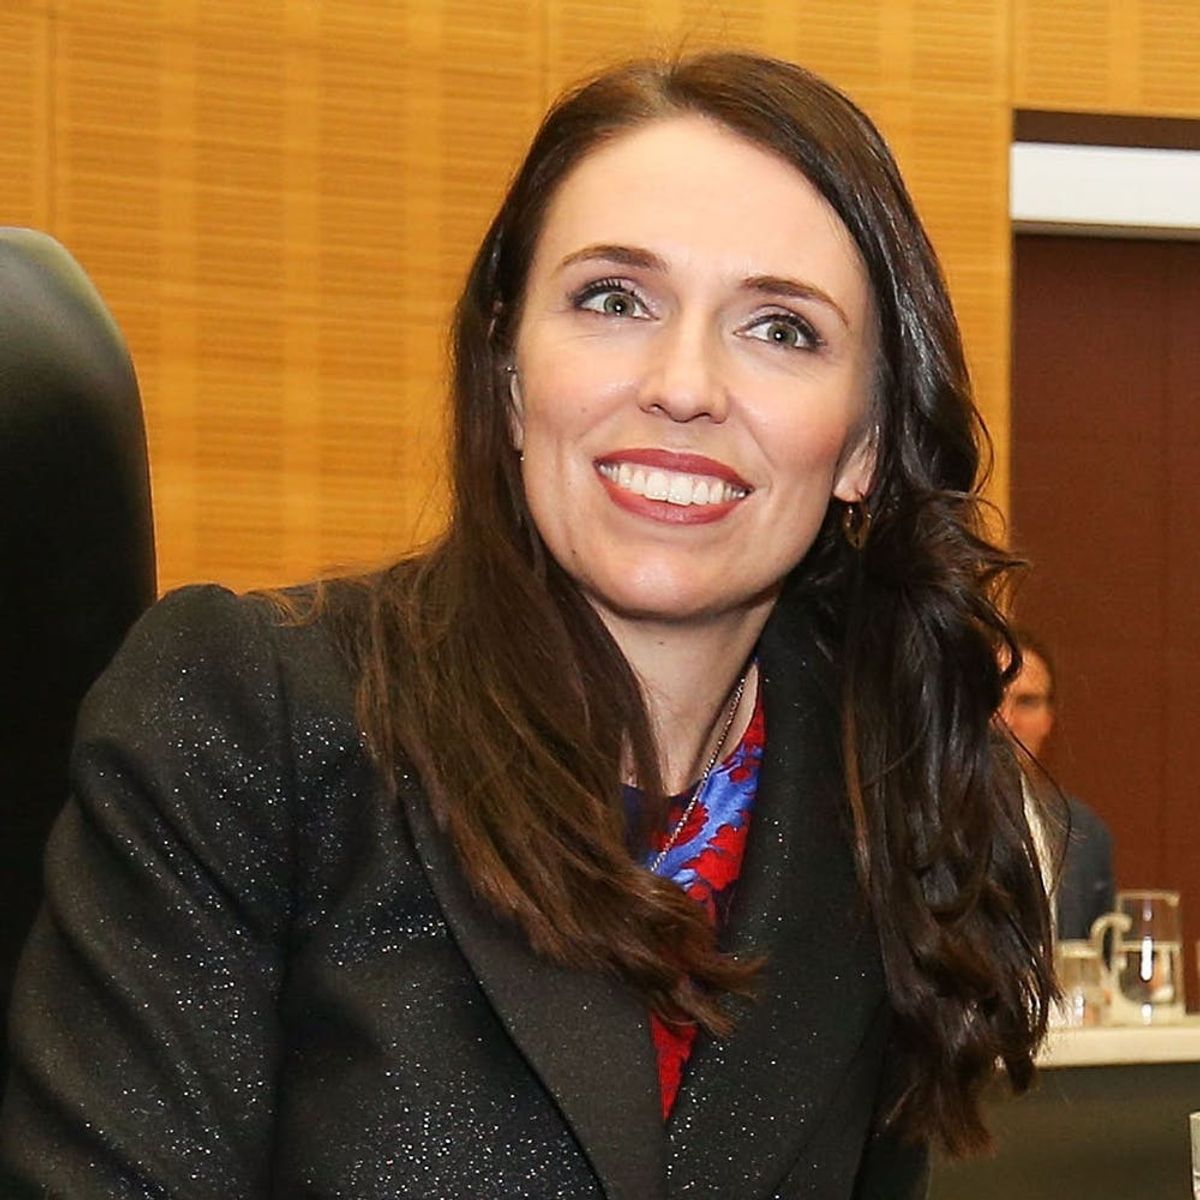 People Can’t Stop Cringing Over This Interview With New Zealand PM Jacinda Ardern